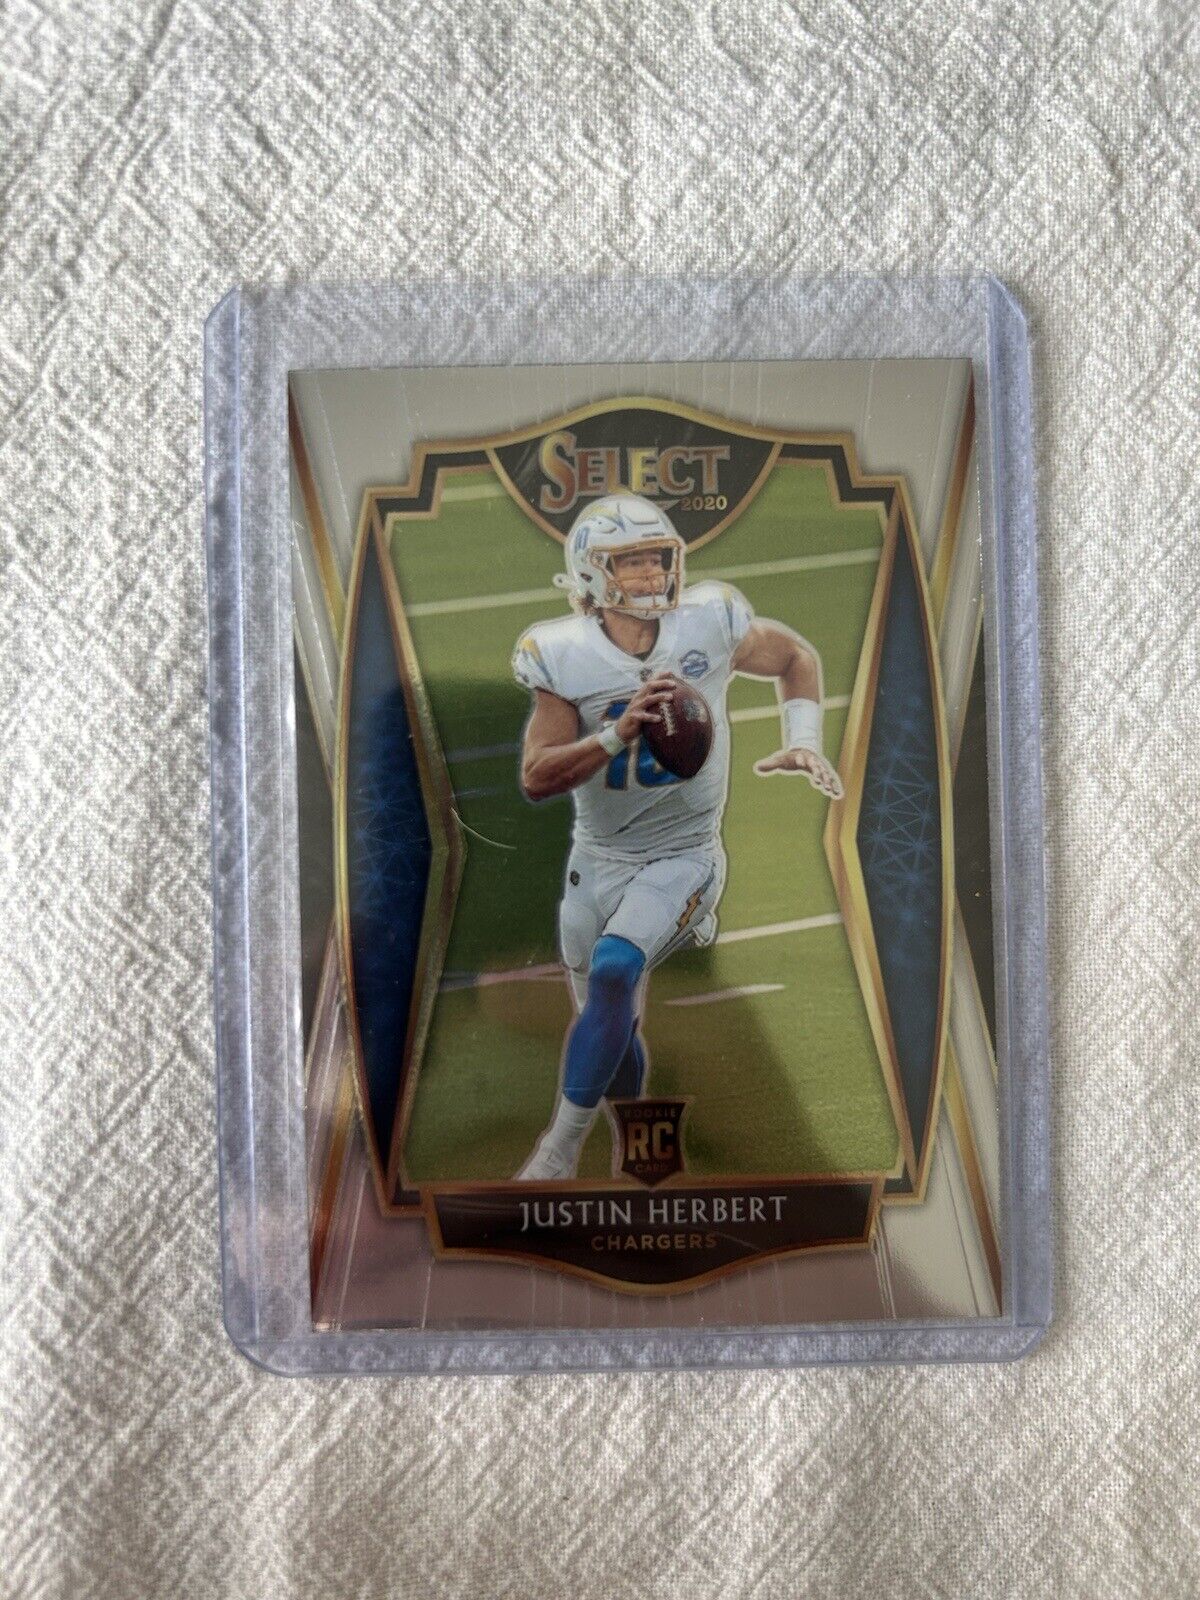 2020 Panini Select Premier Level Justin Herbert RC #144 Rookie Chargers MINT